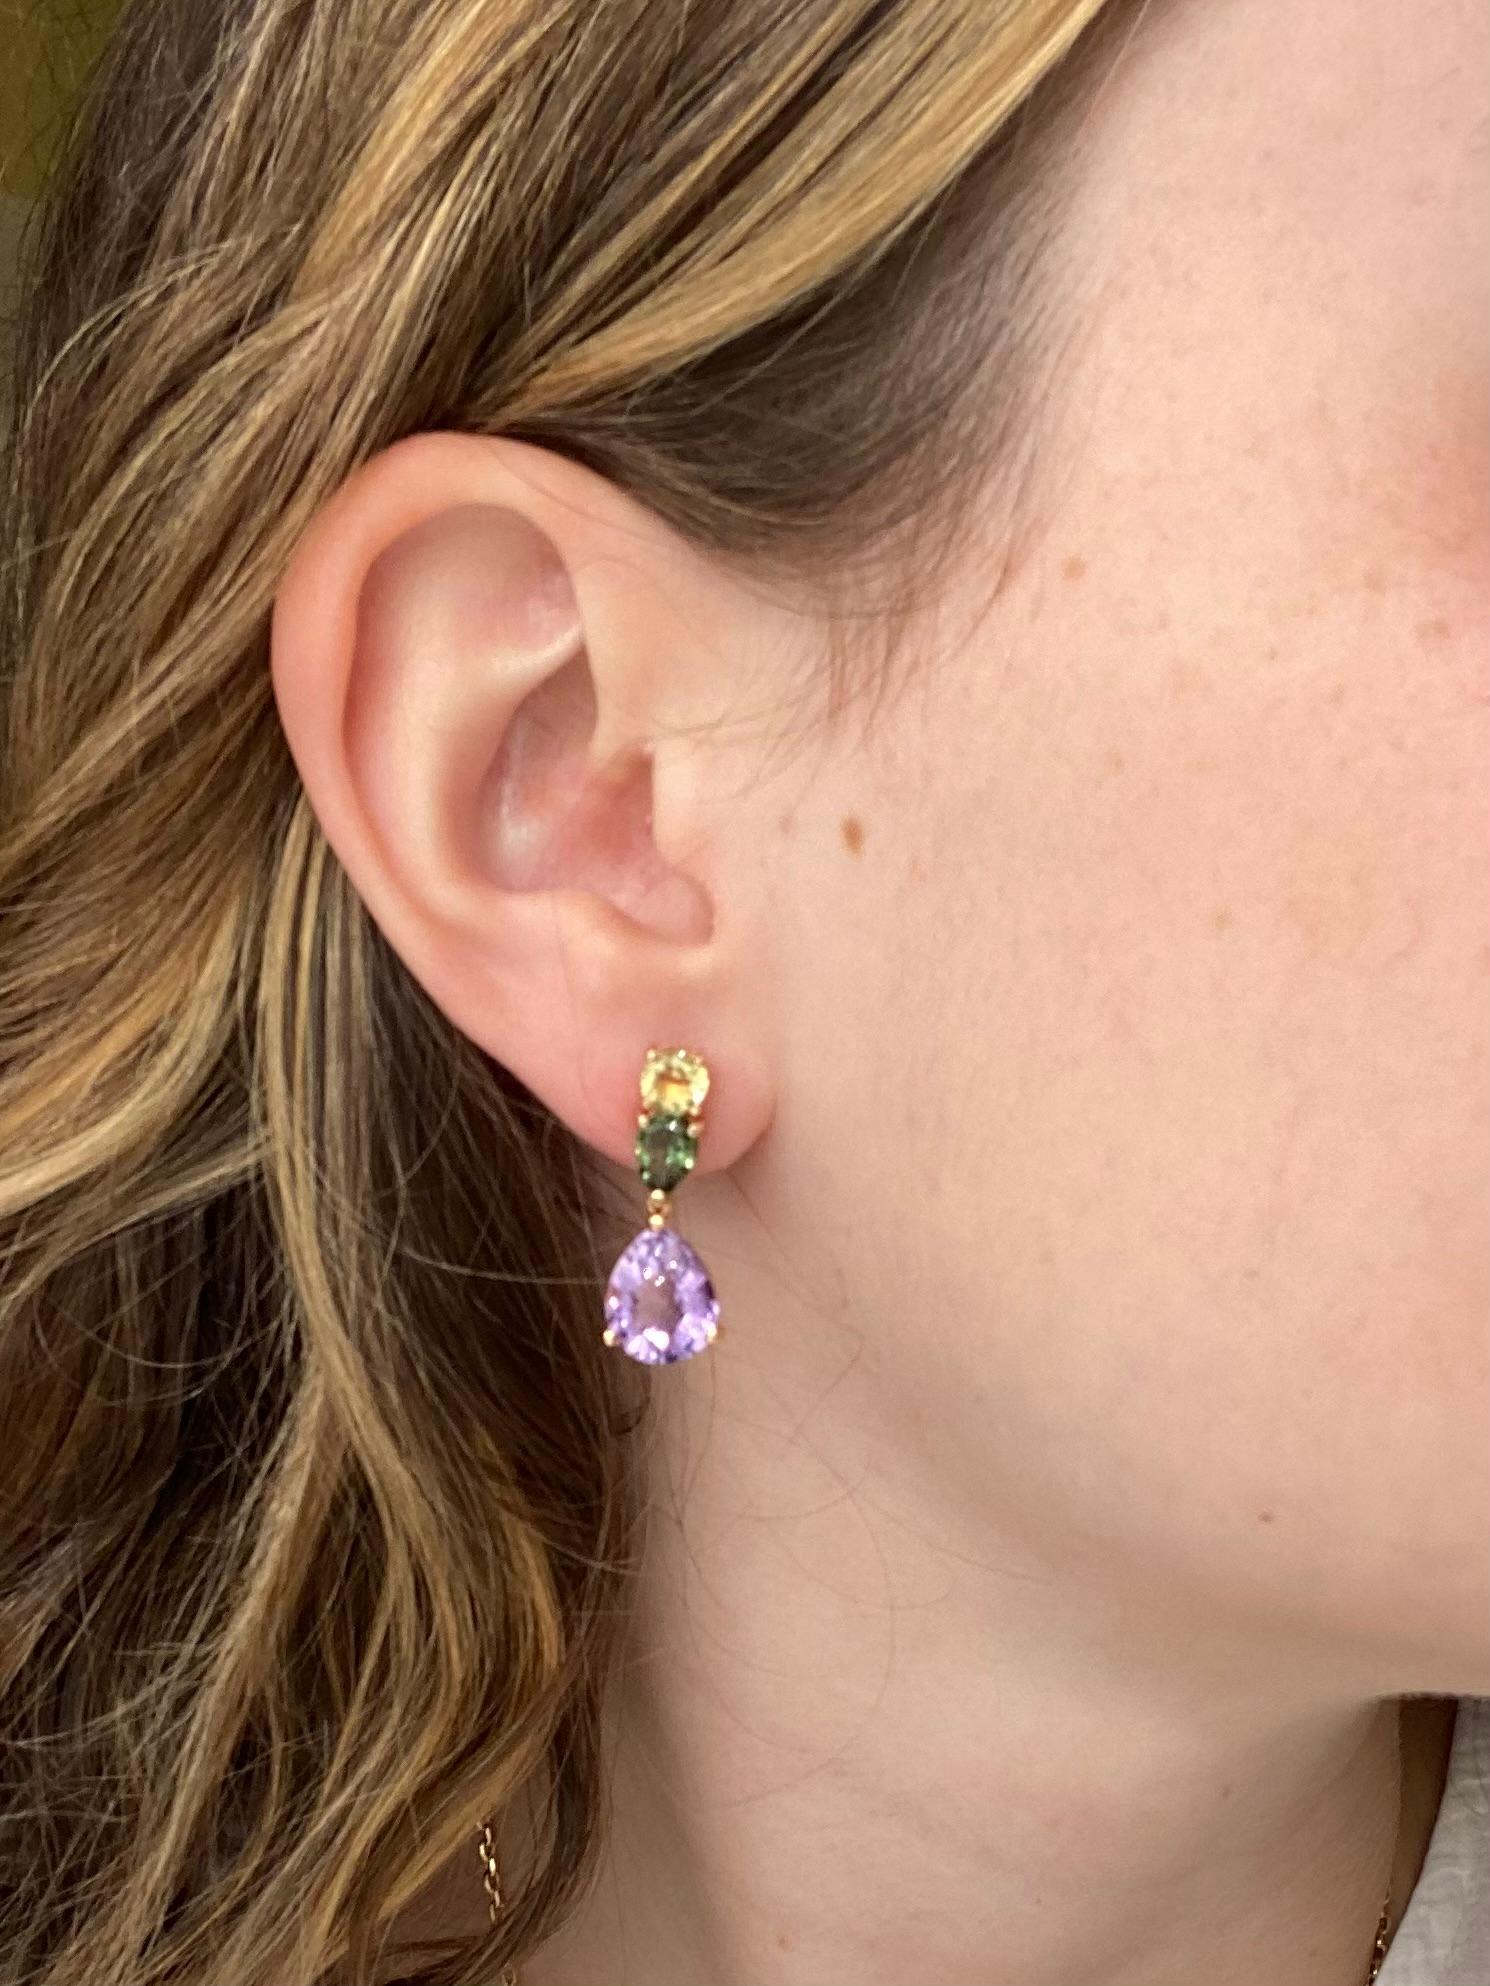 Bead French Rose Gold Earrings Accompanied by a Amethyst, Citrine and Tourmaline For Sale